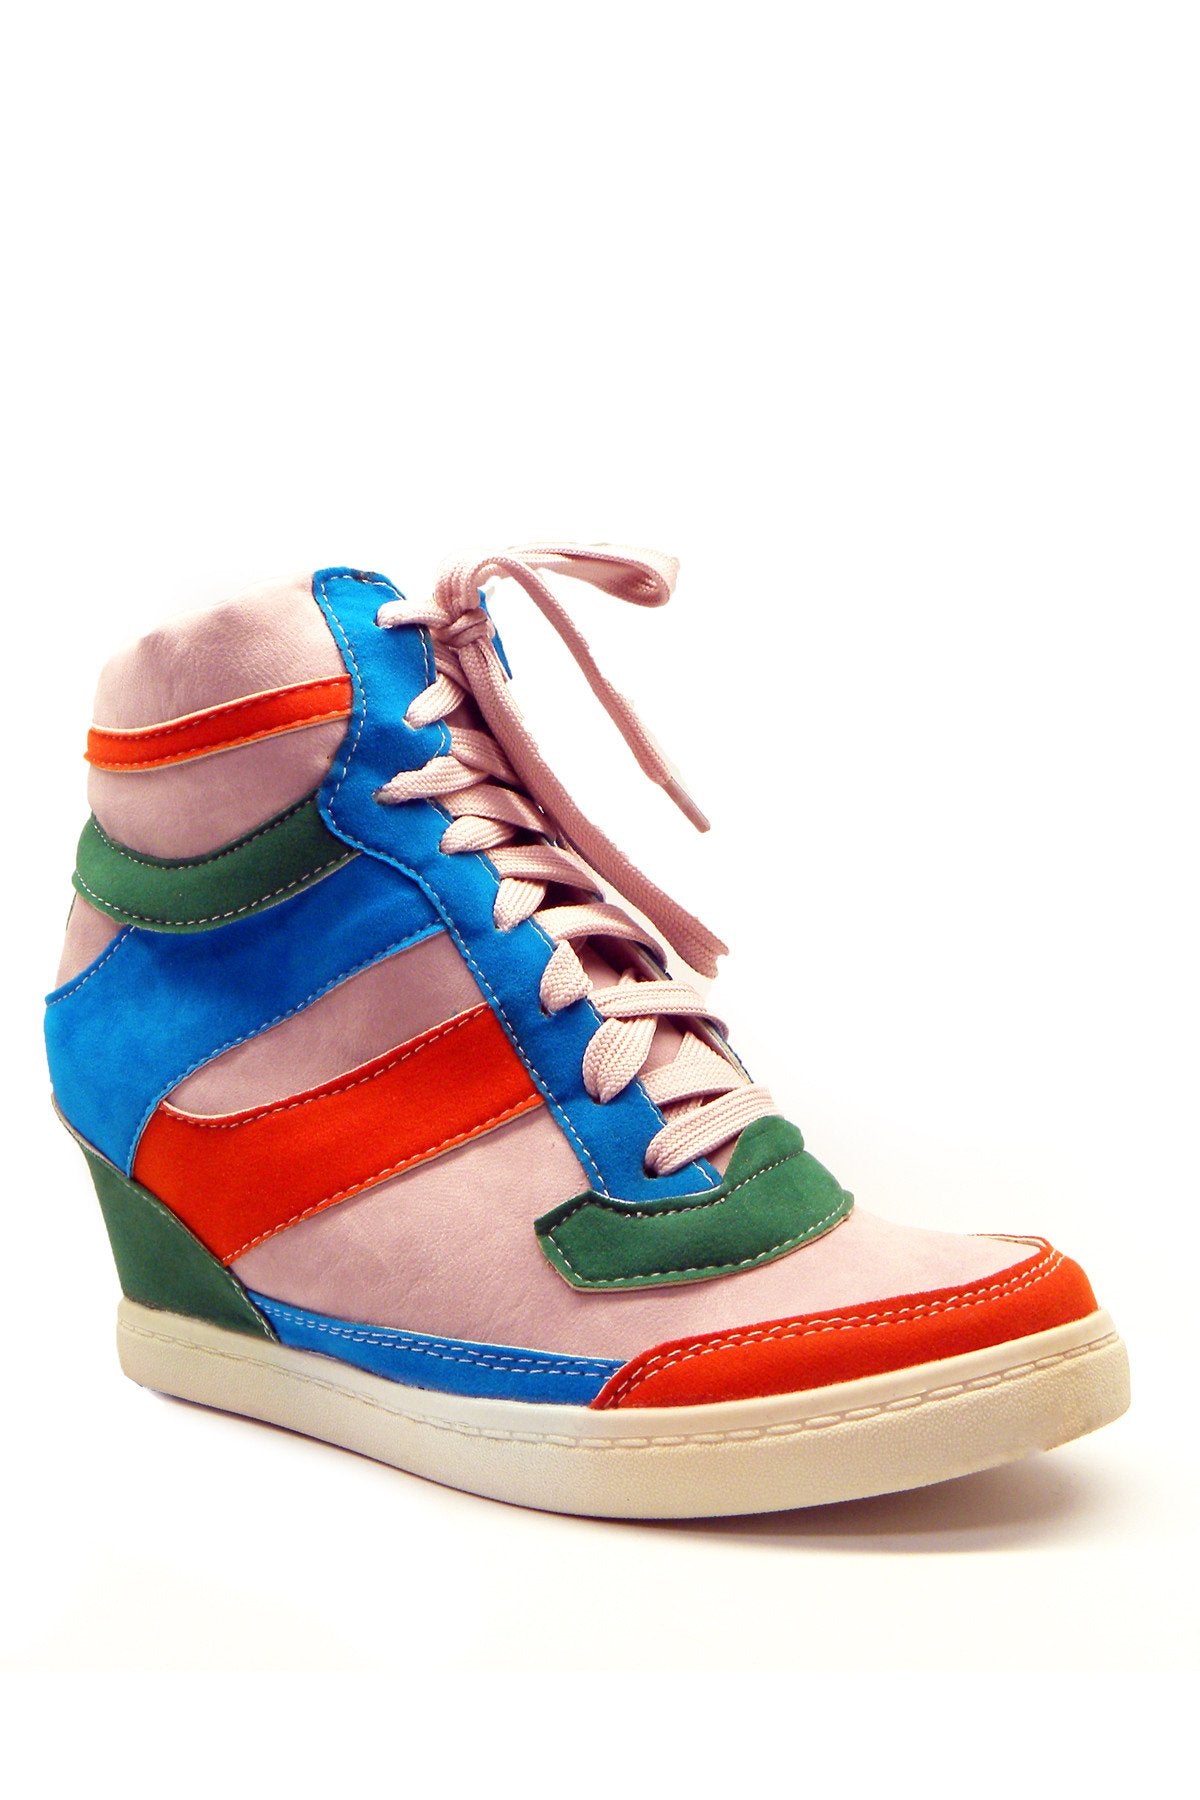 N.Y.L.A. Shoes Penthea Women's High Top Vegan Leather & Suede Wedge Sneakers in White or Pink Multi